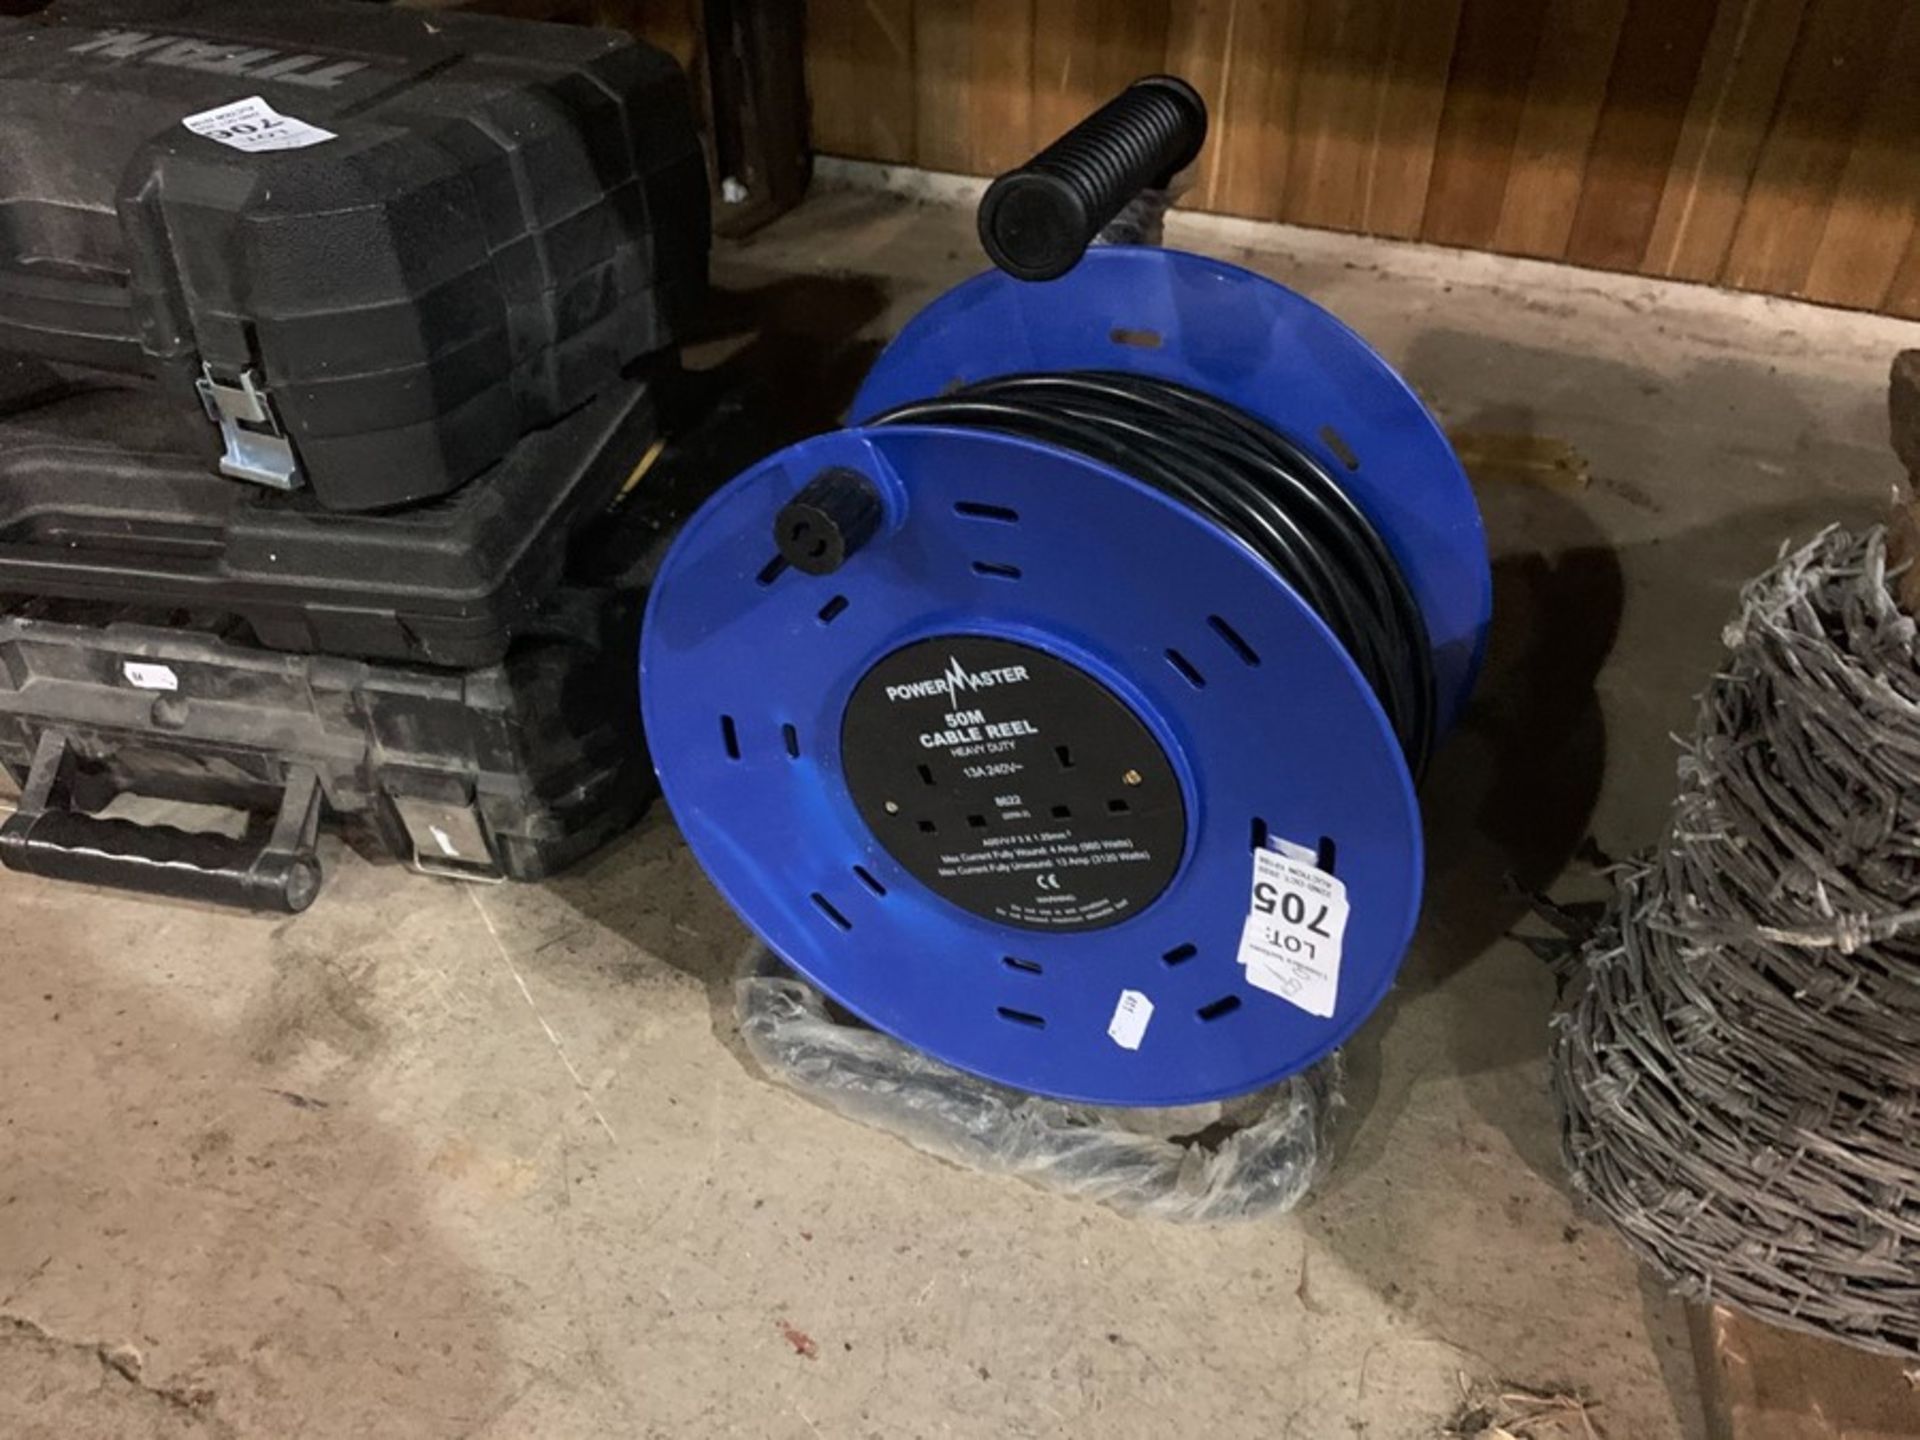 NEW 50M POWERMASTER CABLE EXTENSION REEL - Image 2 of 4